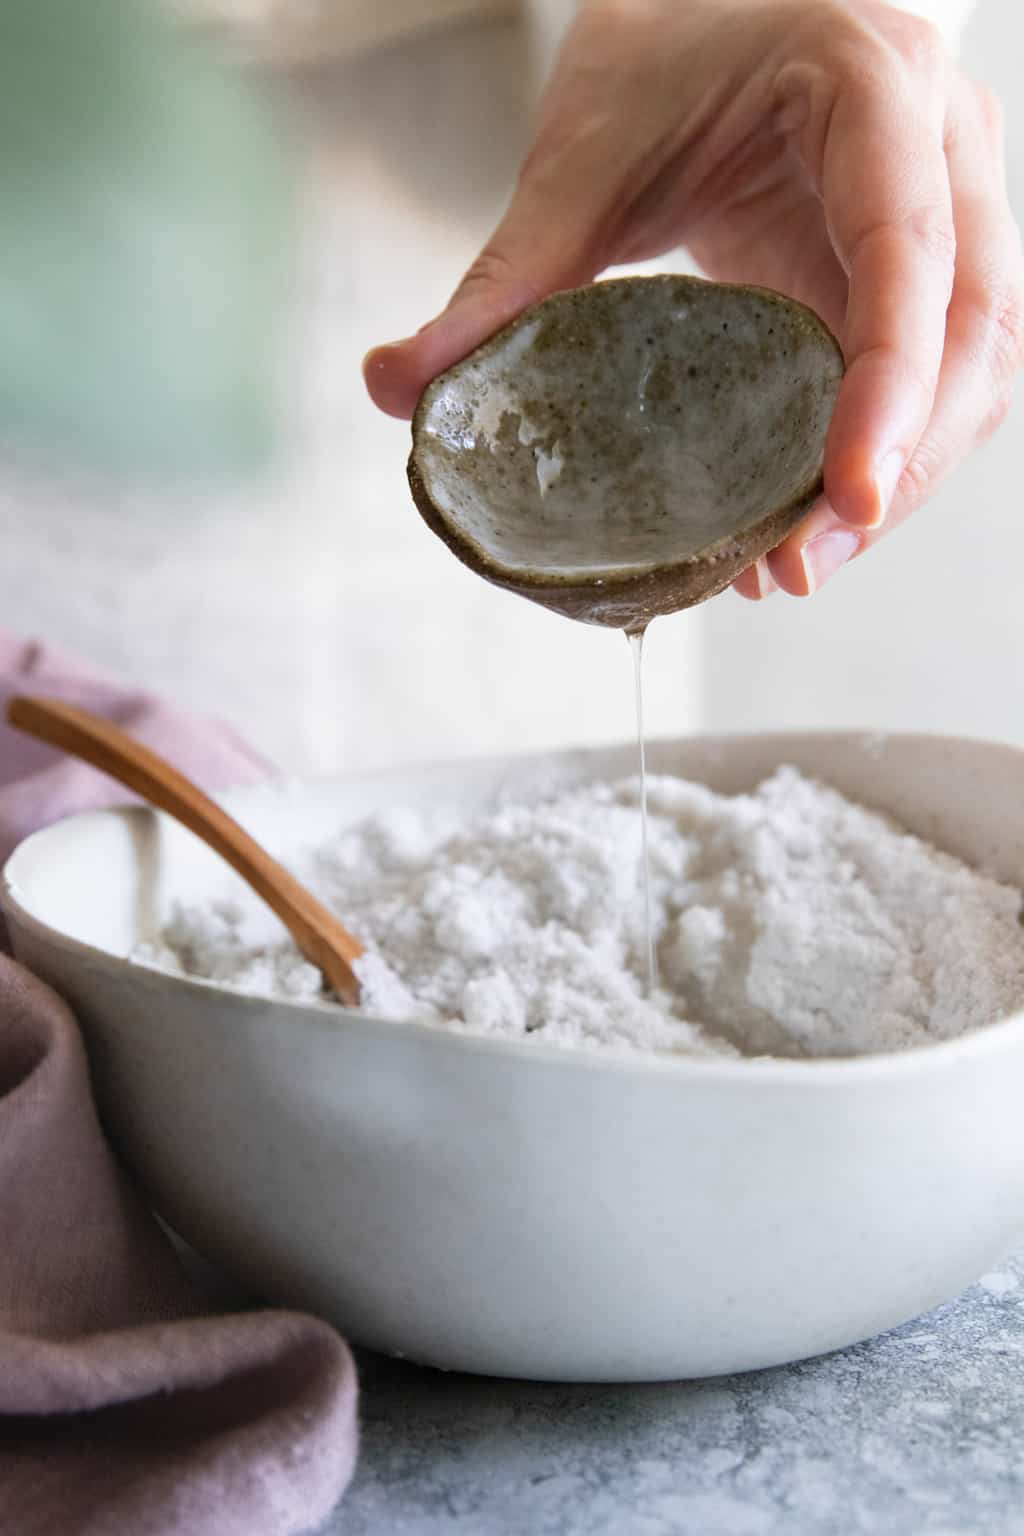 Combine wet and dry ingredients for bath bomb recipes